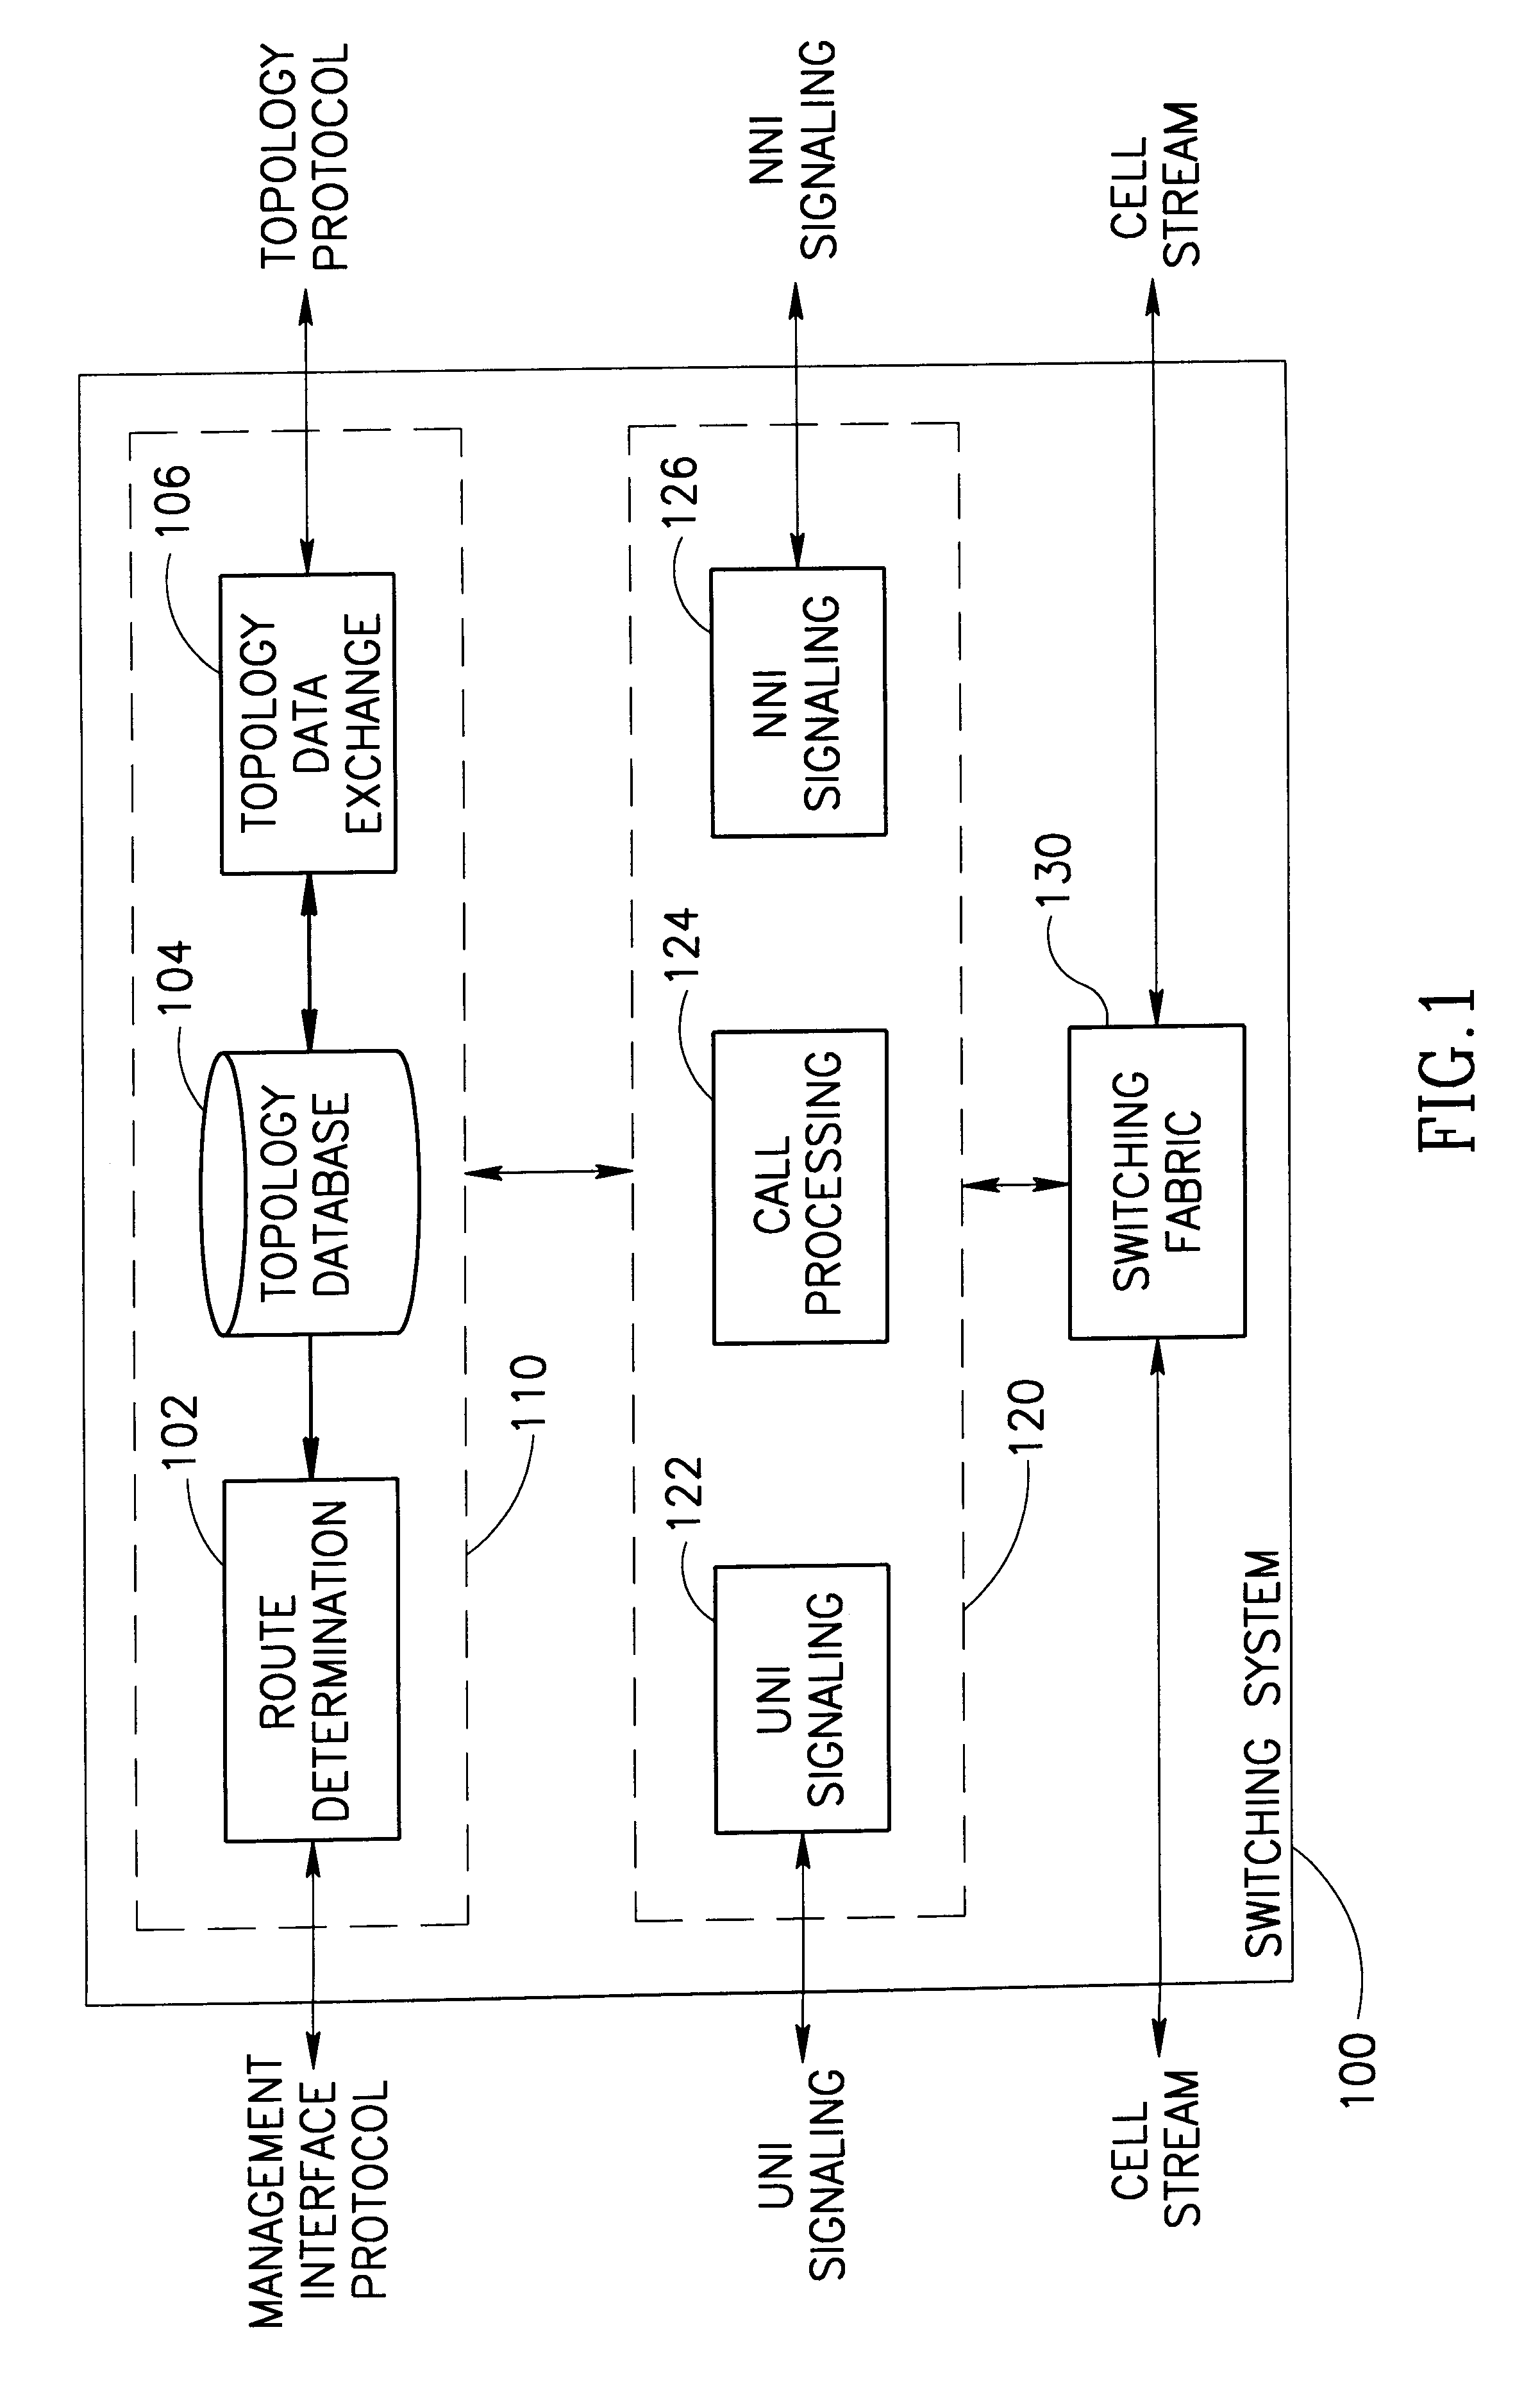 Method of source routing in an asynchronous transfer mode network when a node is in an overload state